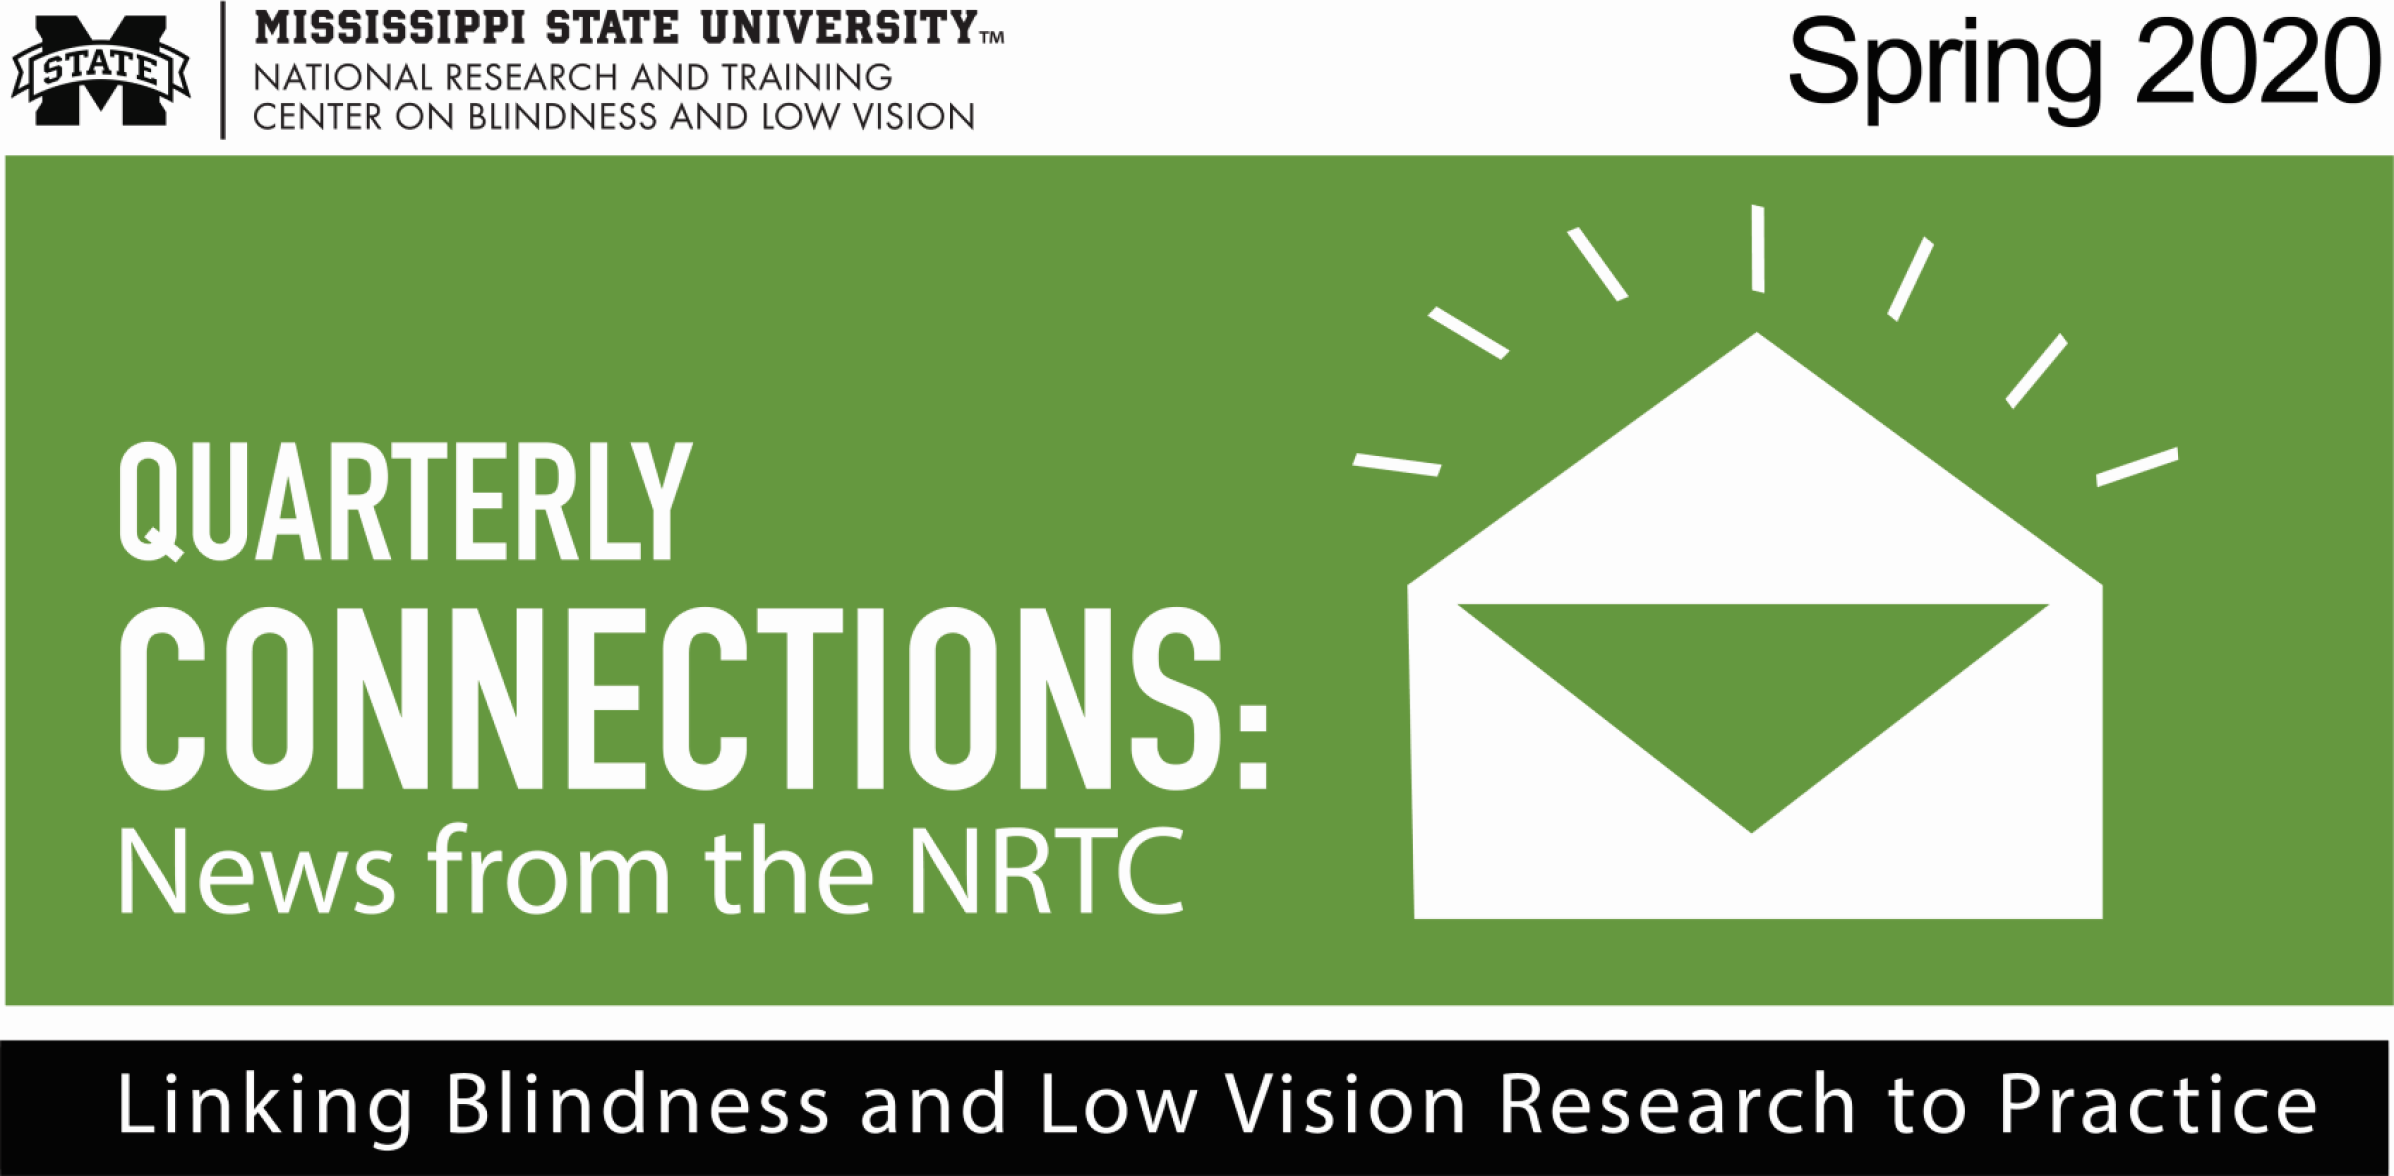 NRTC Quarterly Connections: Spring 2020